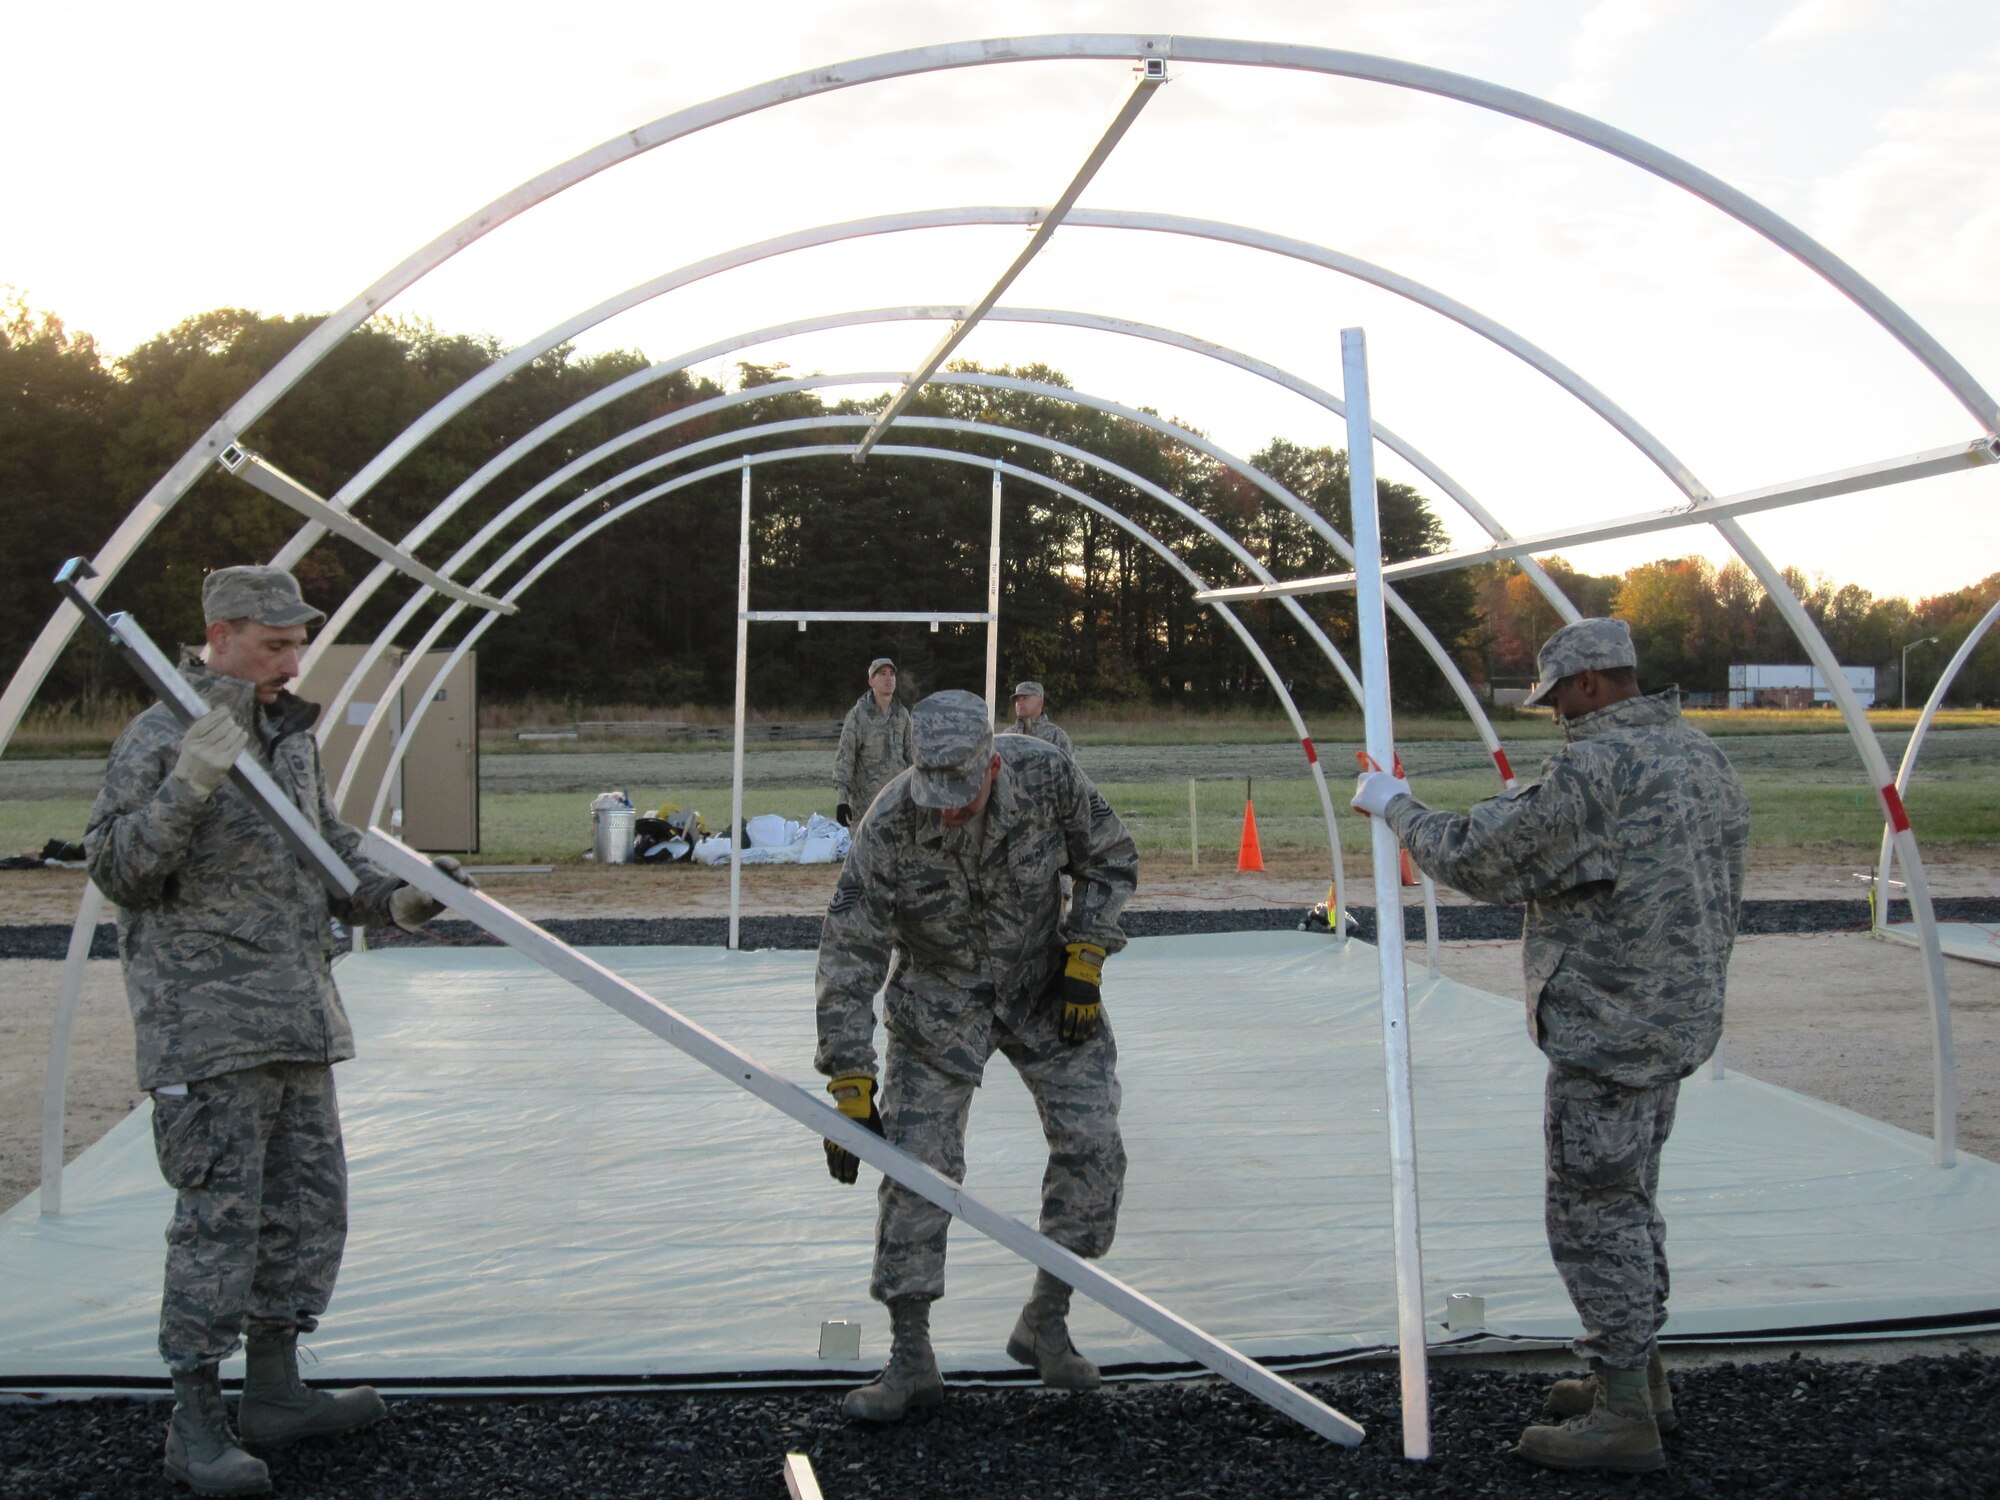 L-R Senior Master Sgt. Stanley F. Dulski, Jr., Tech. Sgt. John D. Trommer  and Airman 1st Class John W. Harper, II, members of the Maryland Air National Guard's 175th Civil Engineer Squadron, assemble an Alaskan Tent  at Warfield Air National Guard Base in Baltimore, Md., Oct. 30, 2010. The work is in preparation for approximately 300 National Guard members who will be housed at the base to participate Exercise Vigilant Guard. (U.S. Air Force photo by Lt. Col. Steven H. Benden/Released)

